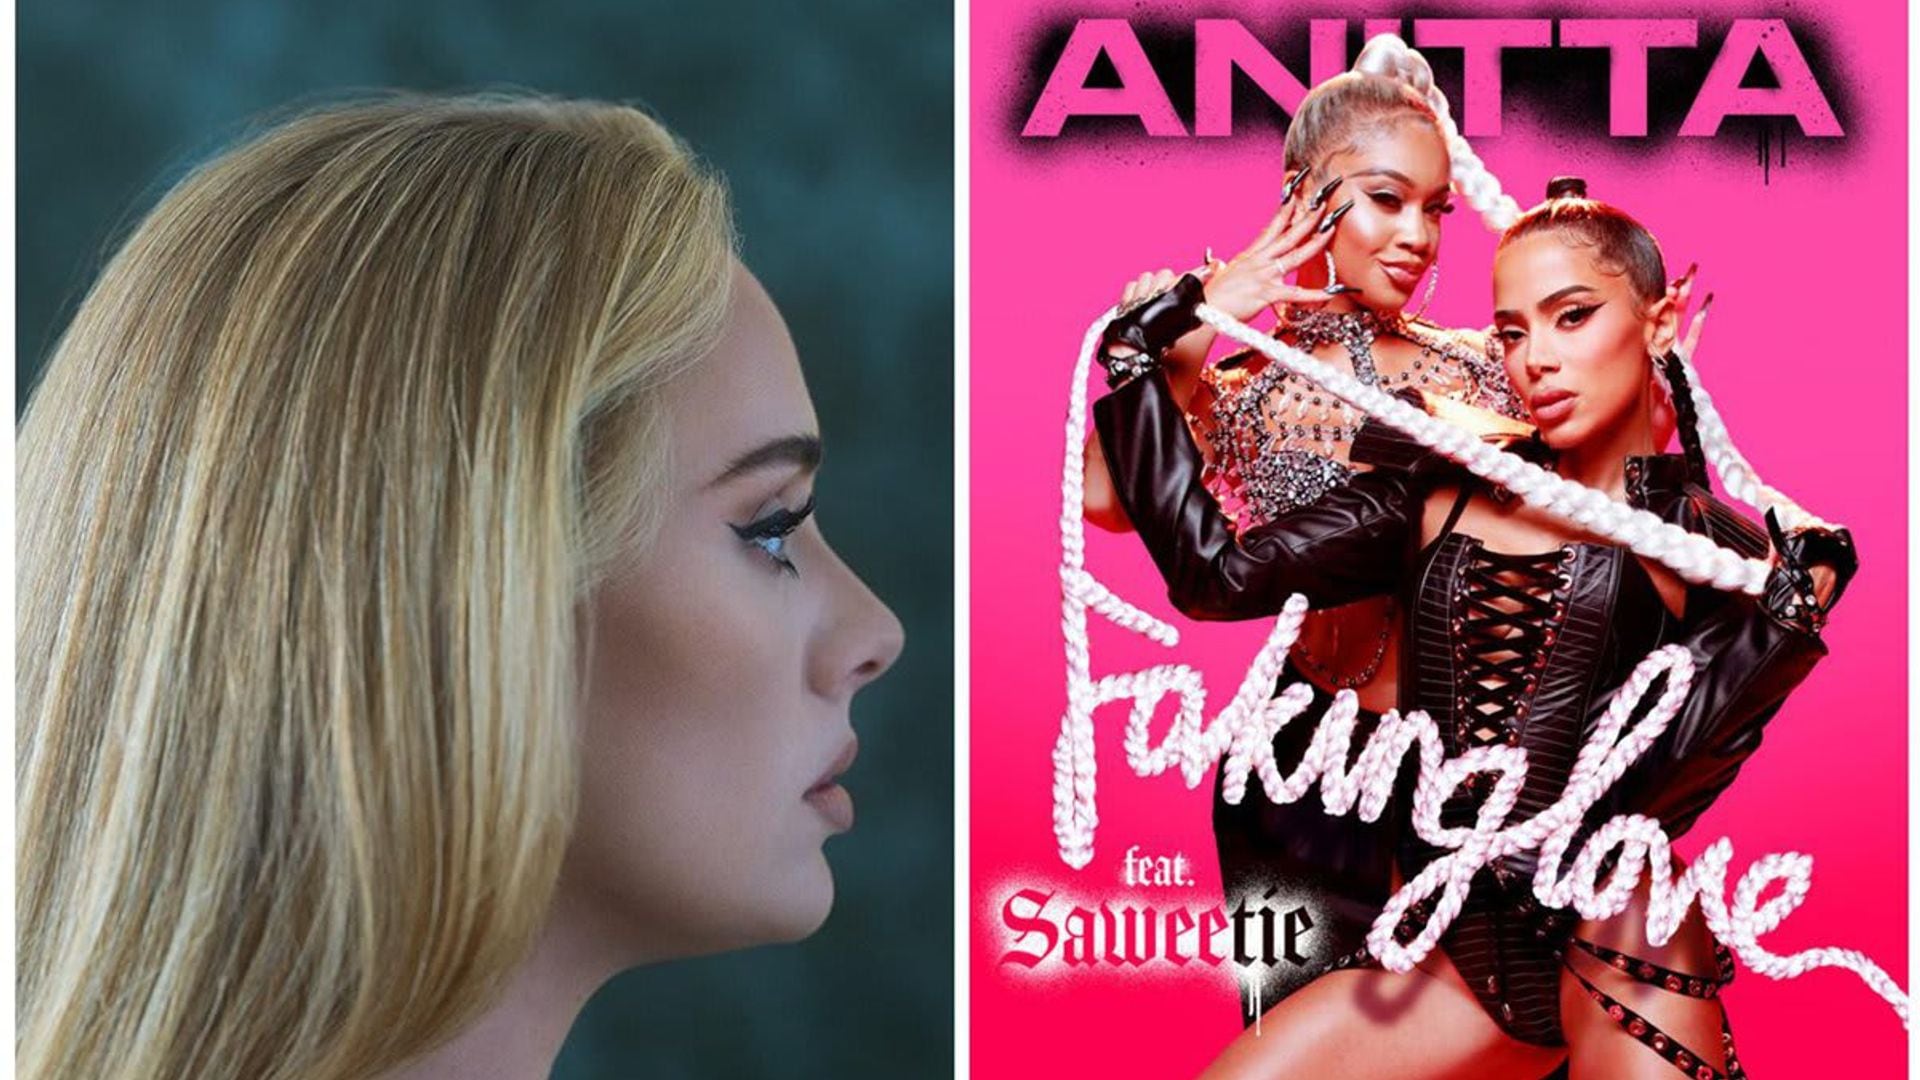 New Music Friday: the biggest releases from Adele, Anitta, Dom Kennedy, and more